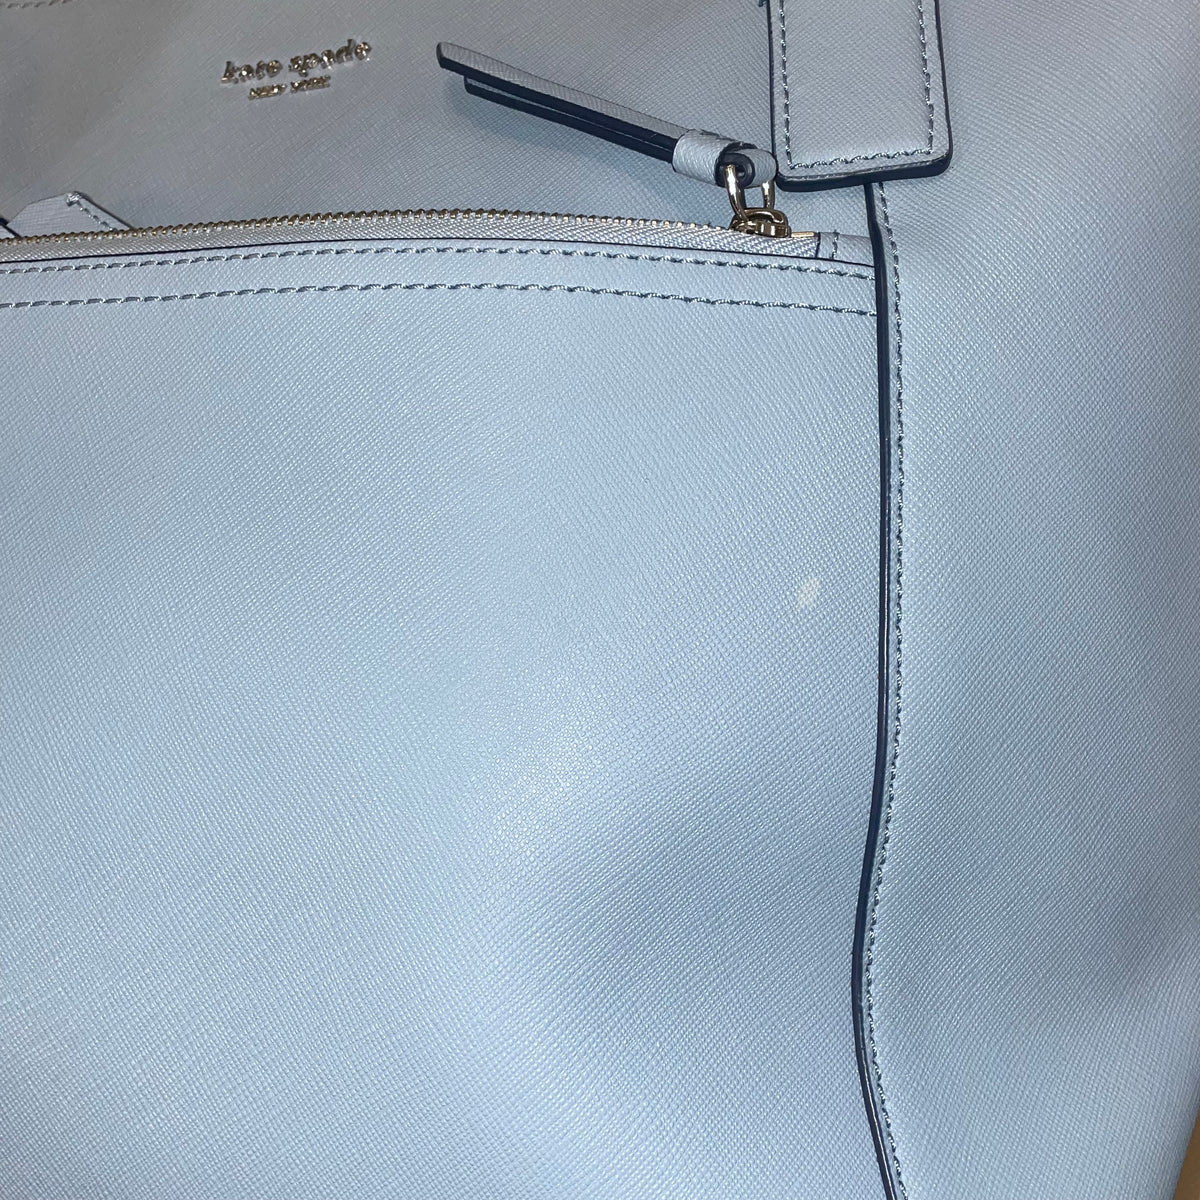 Kate Spade Saffiano Leather Zippers Tote